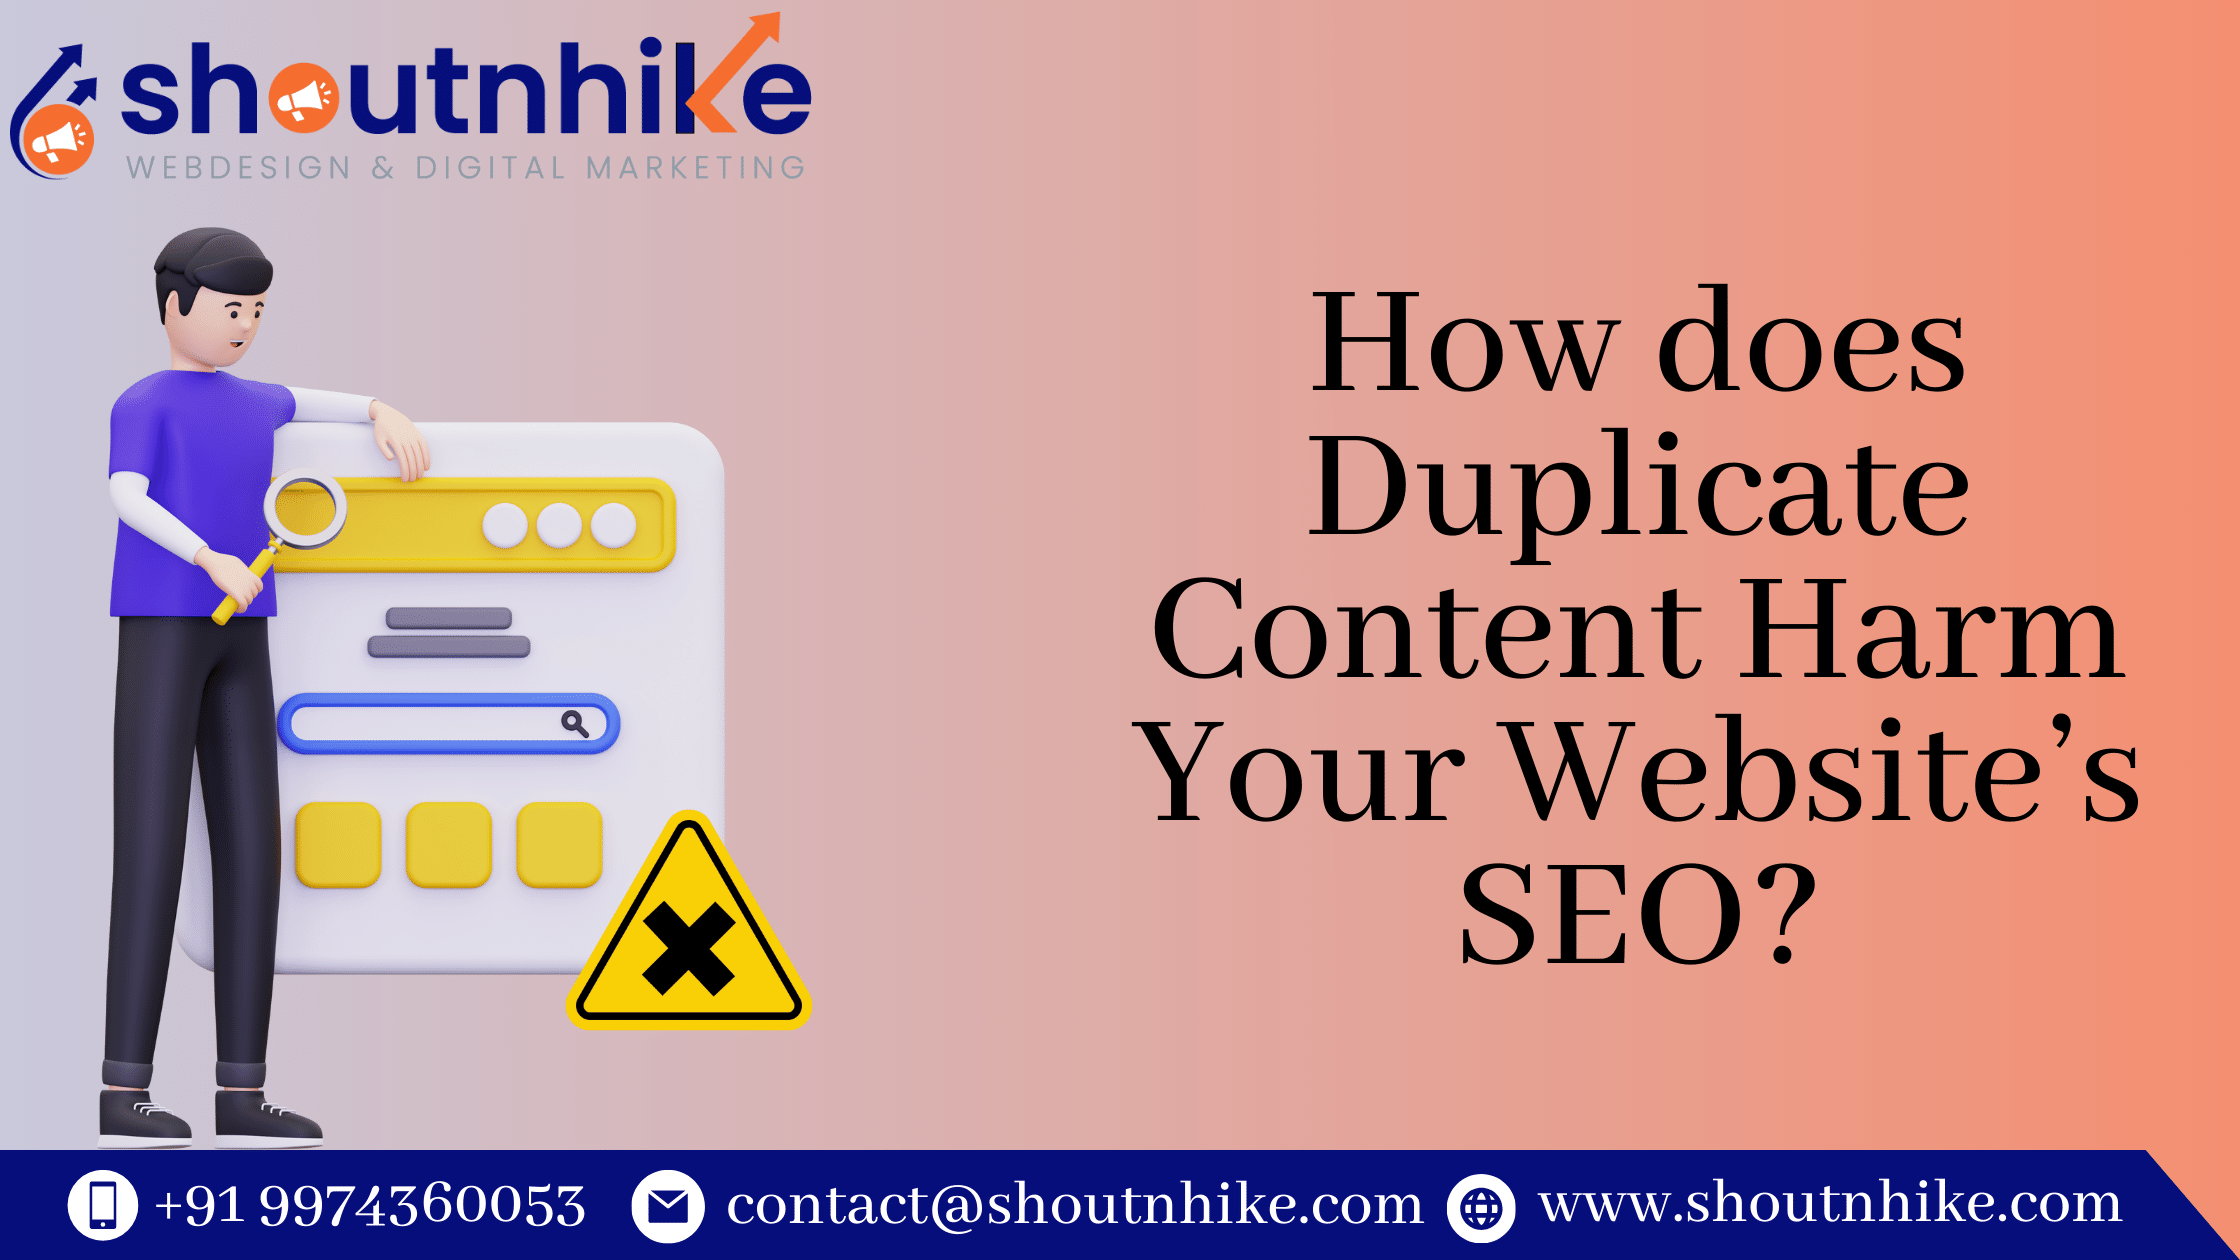 How does Duplicate Content Harm Your Website’s SEO?